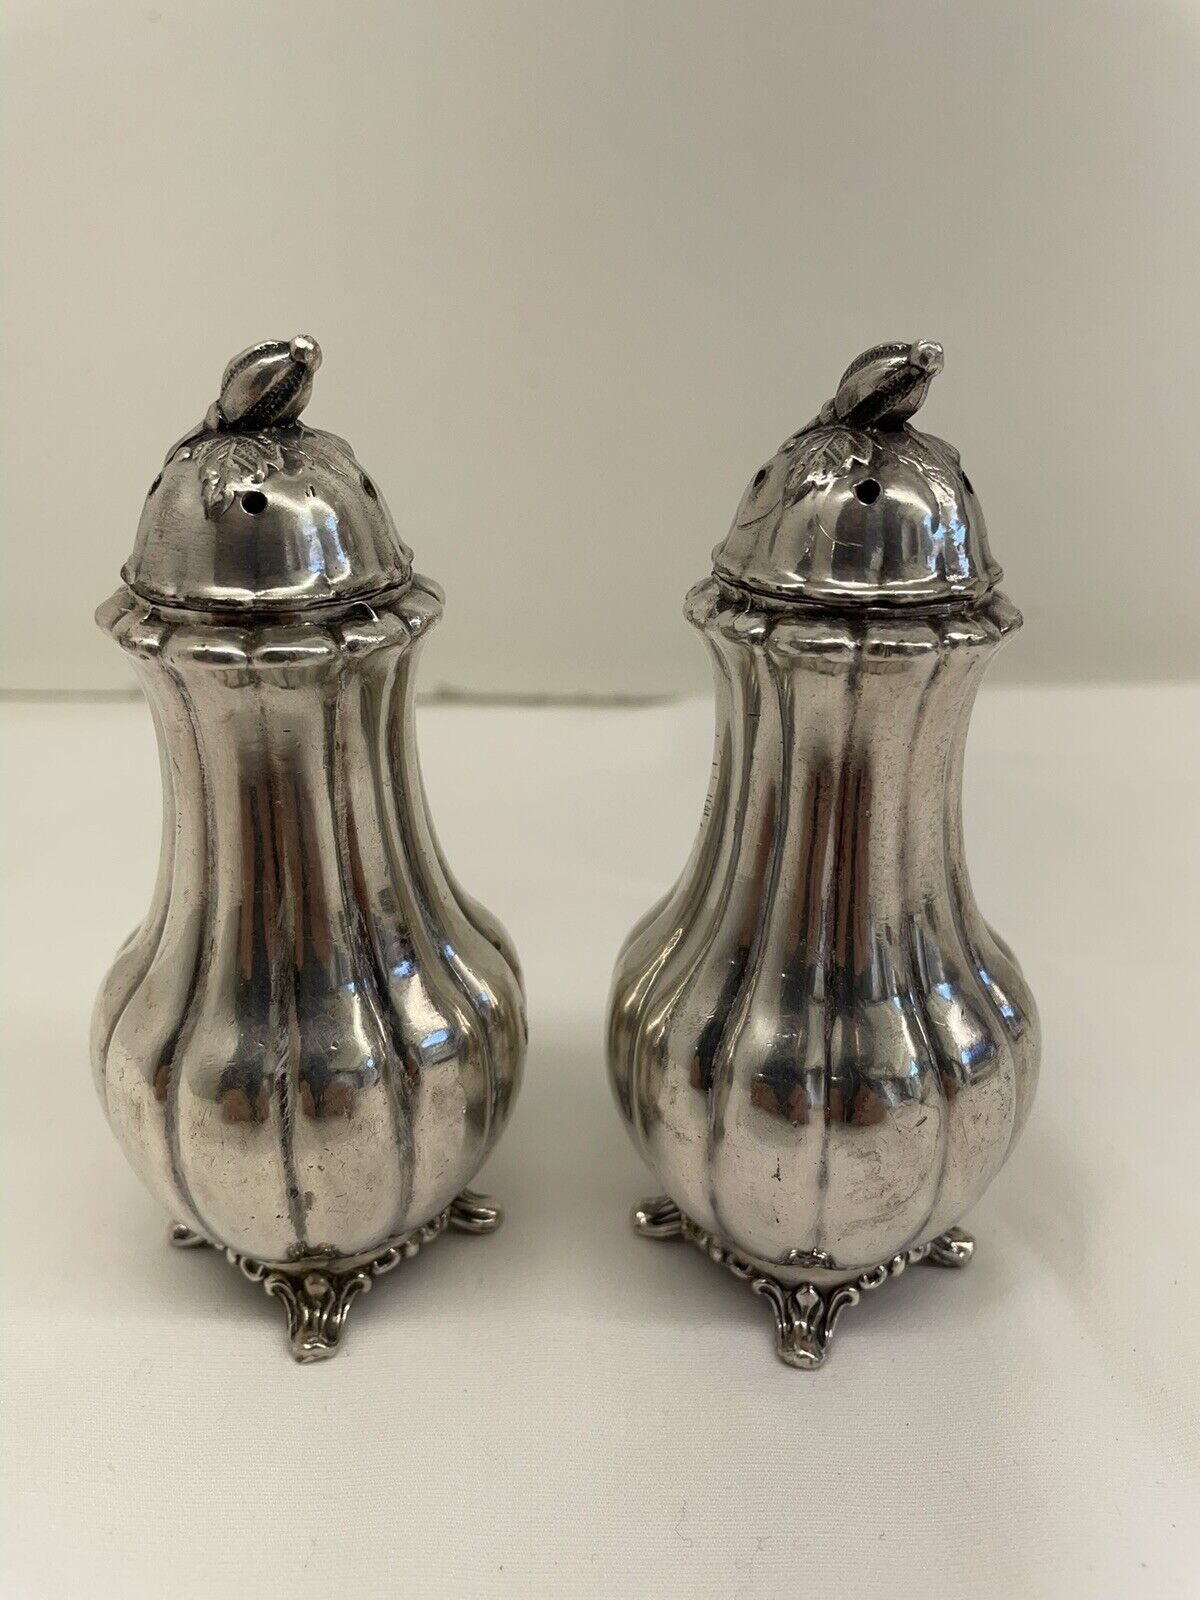 Vintage Sheffield Design by Community Melon Silverplated Salt and Pepper Shakers